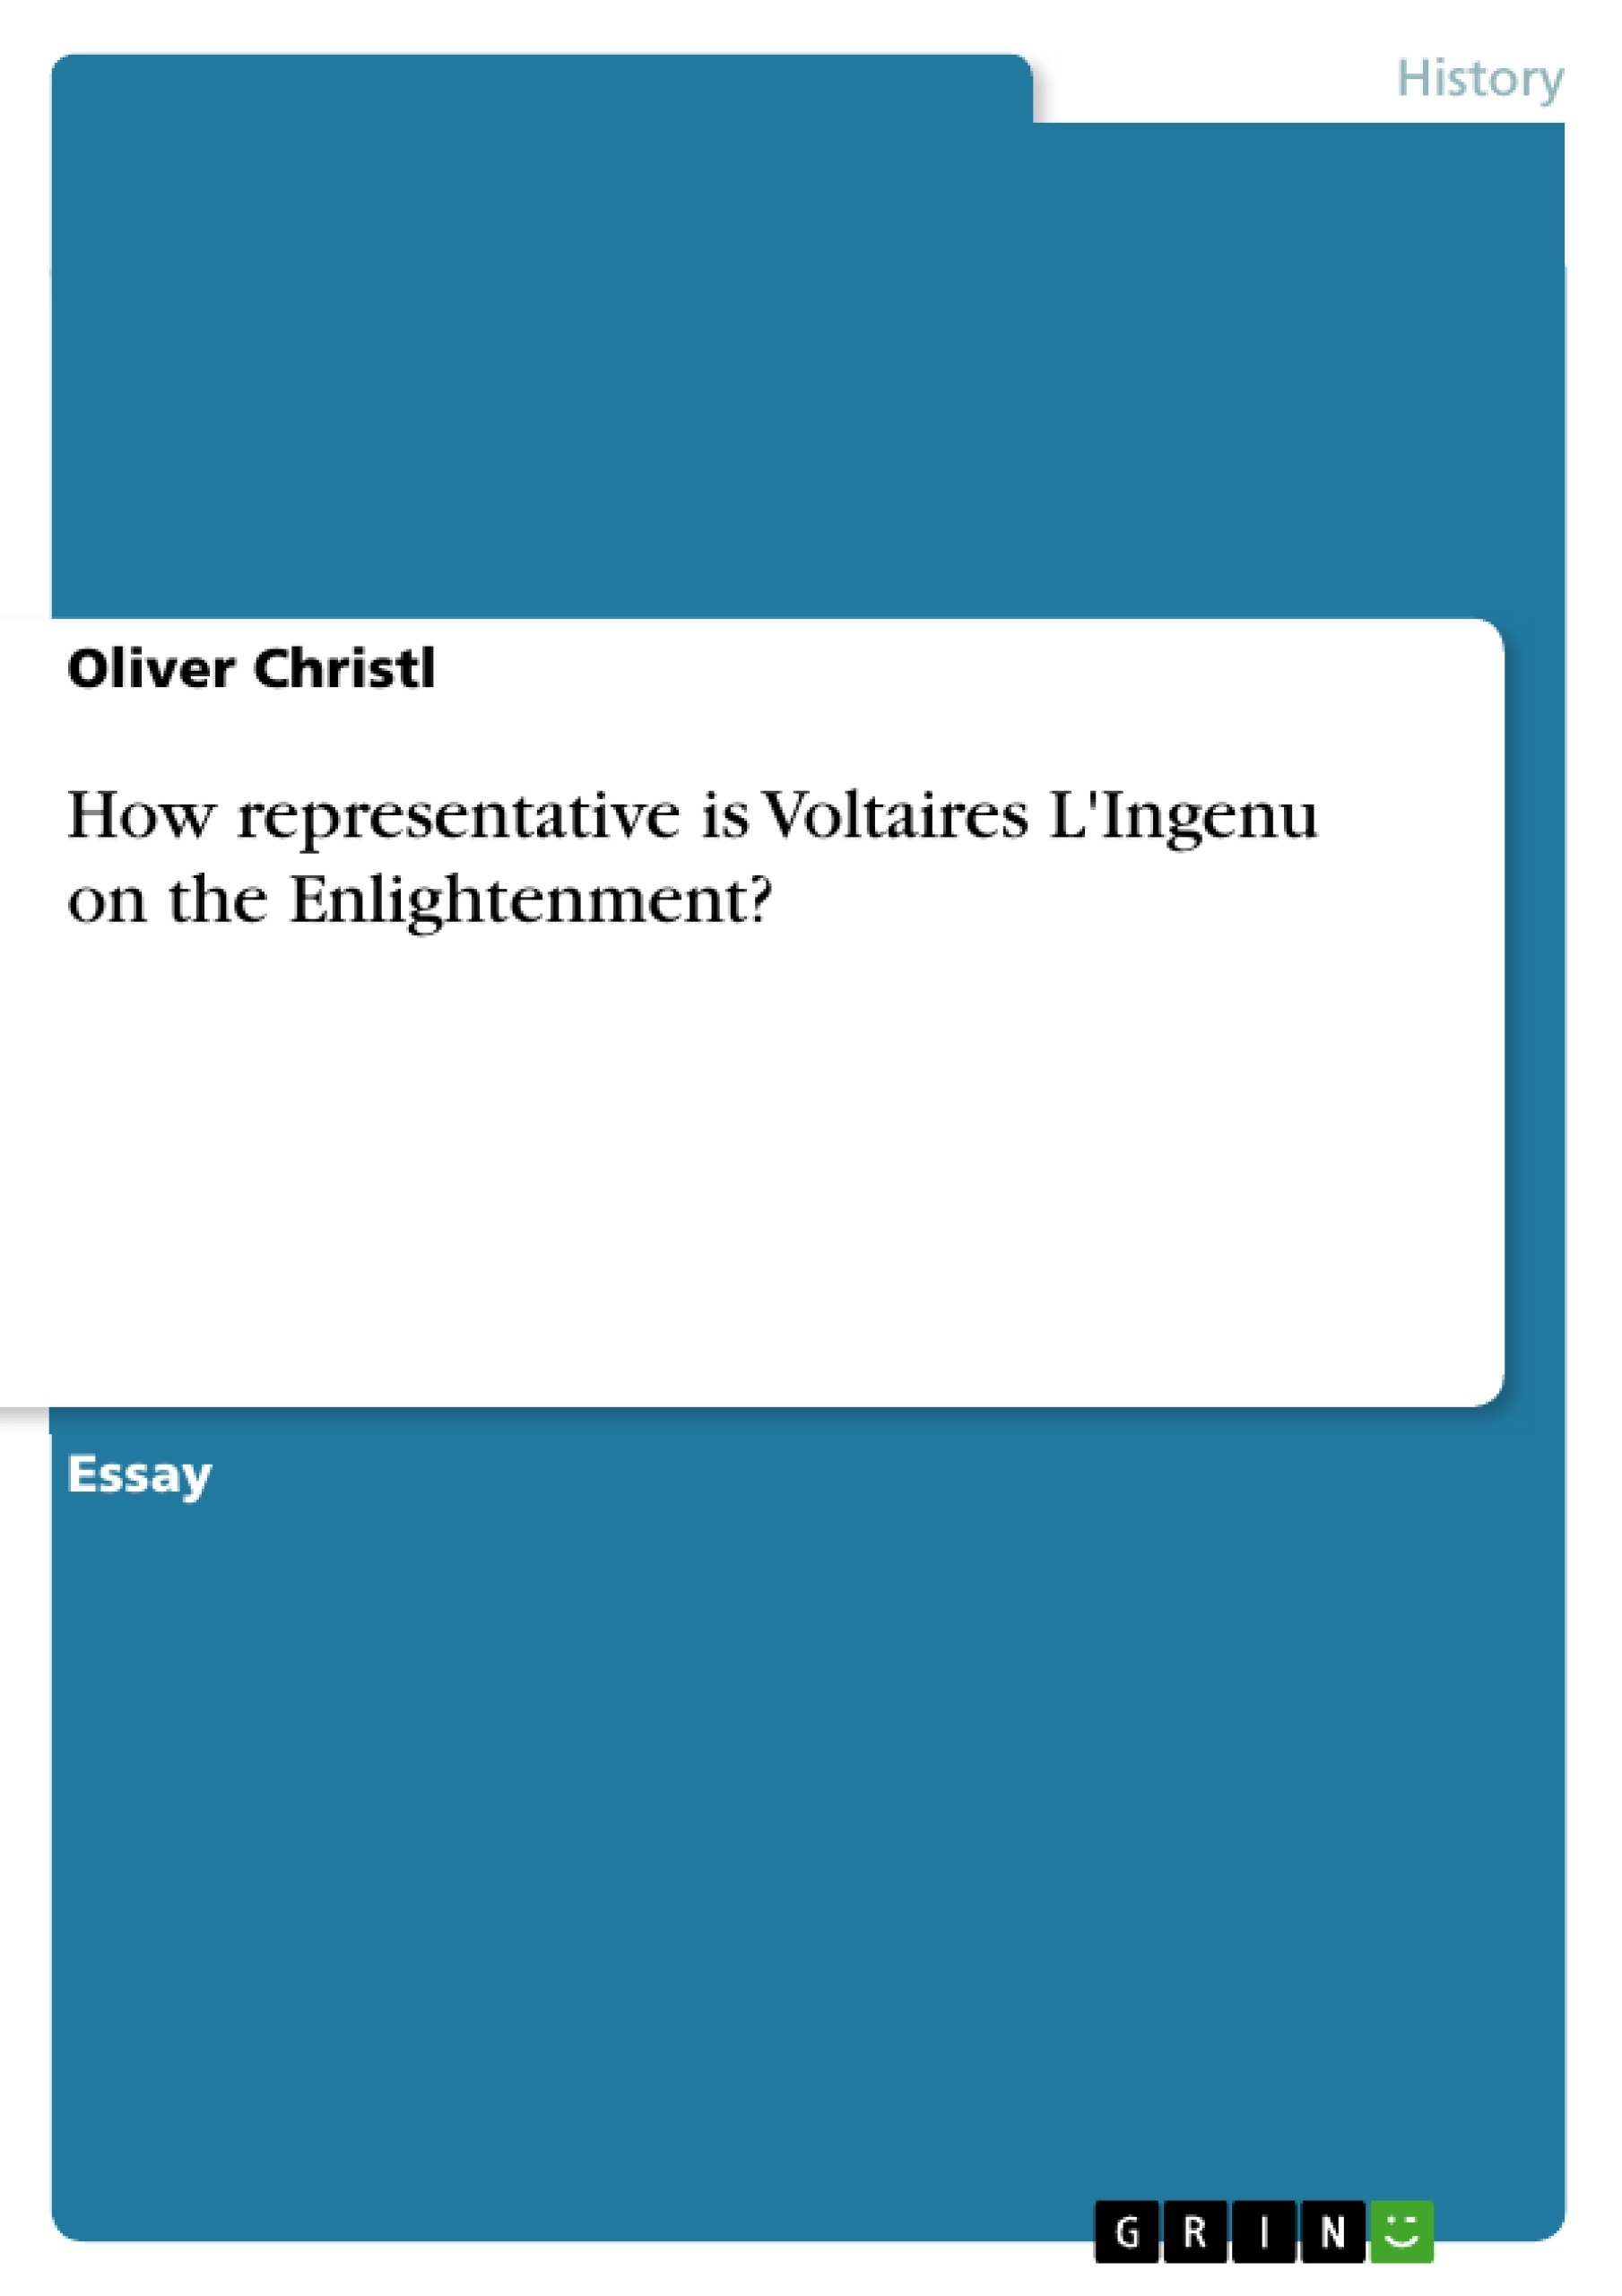 Title: How representative is Voltaires L'Ingenu on the Enlightenment?